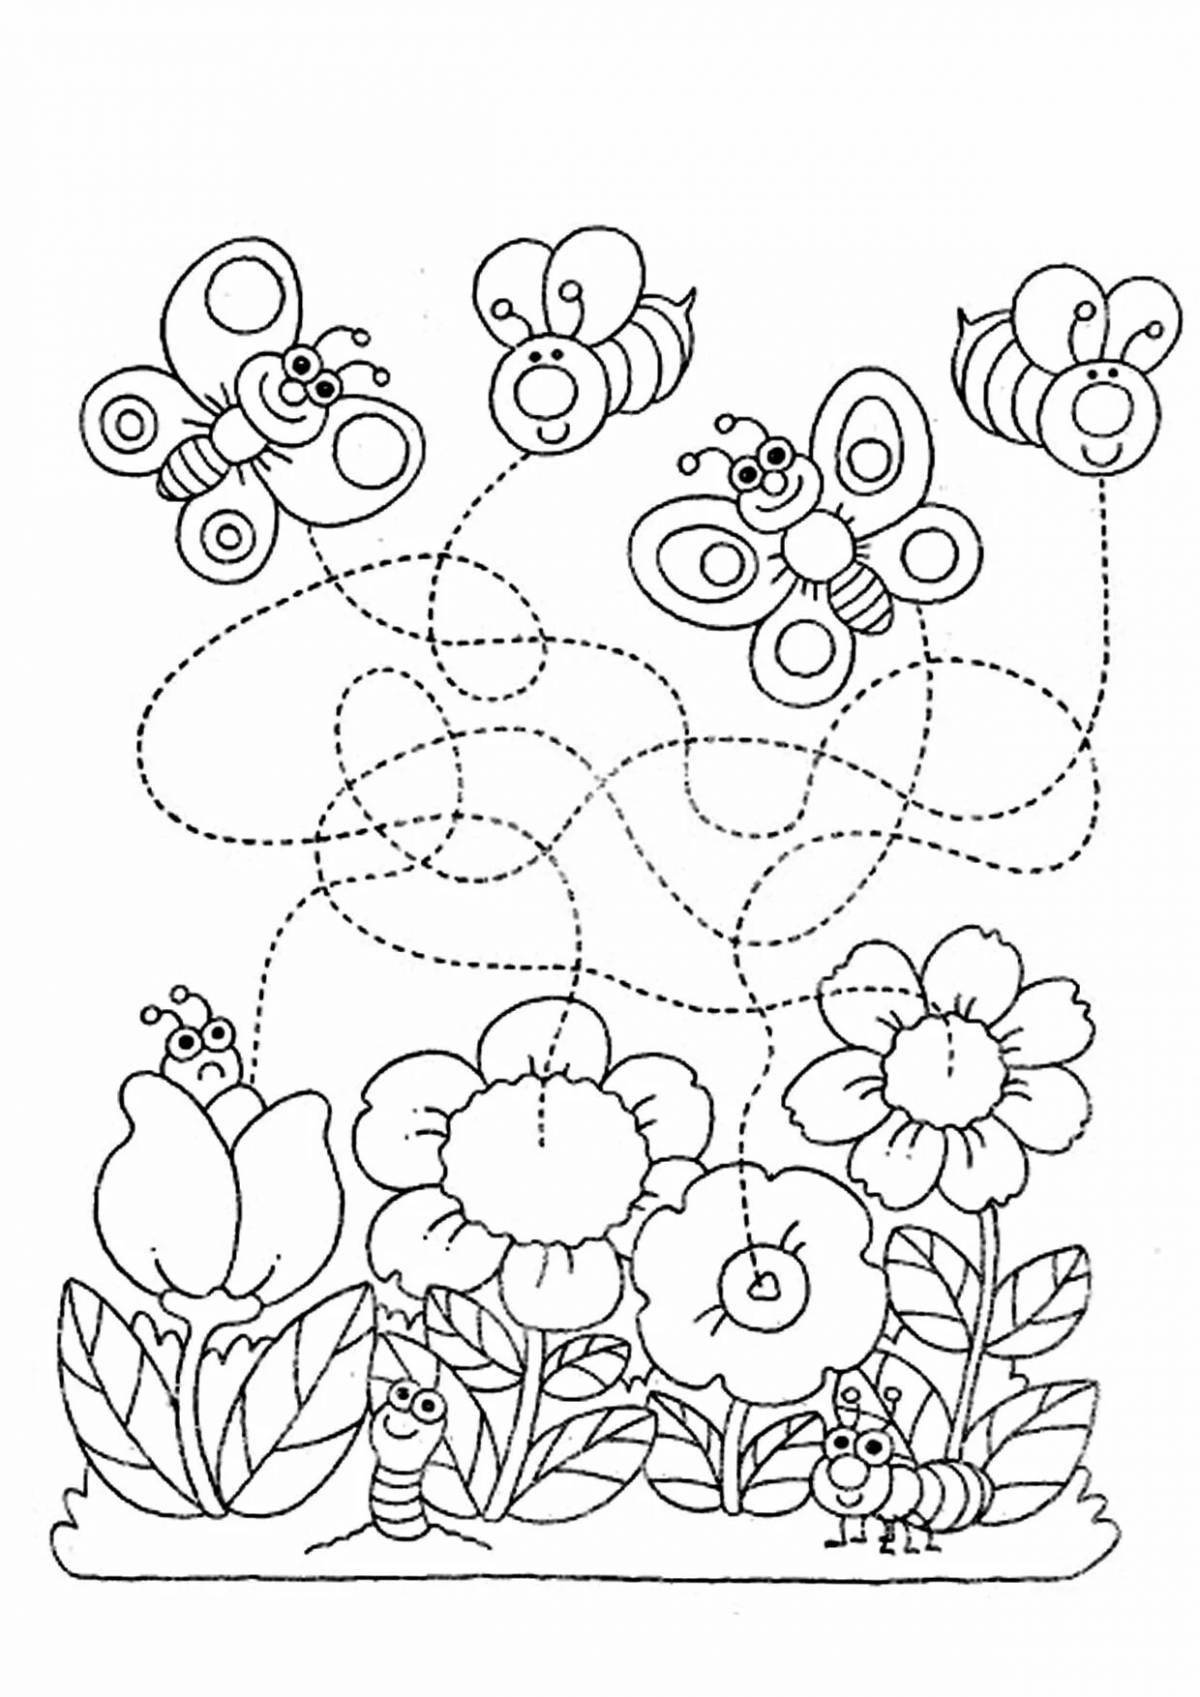 Colorful coloring book for developing fine motor skills